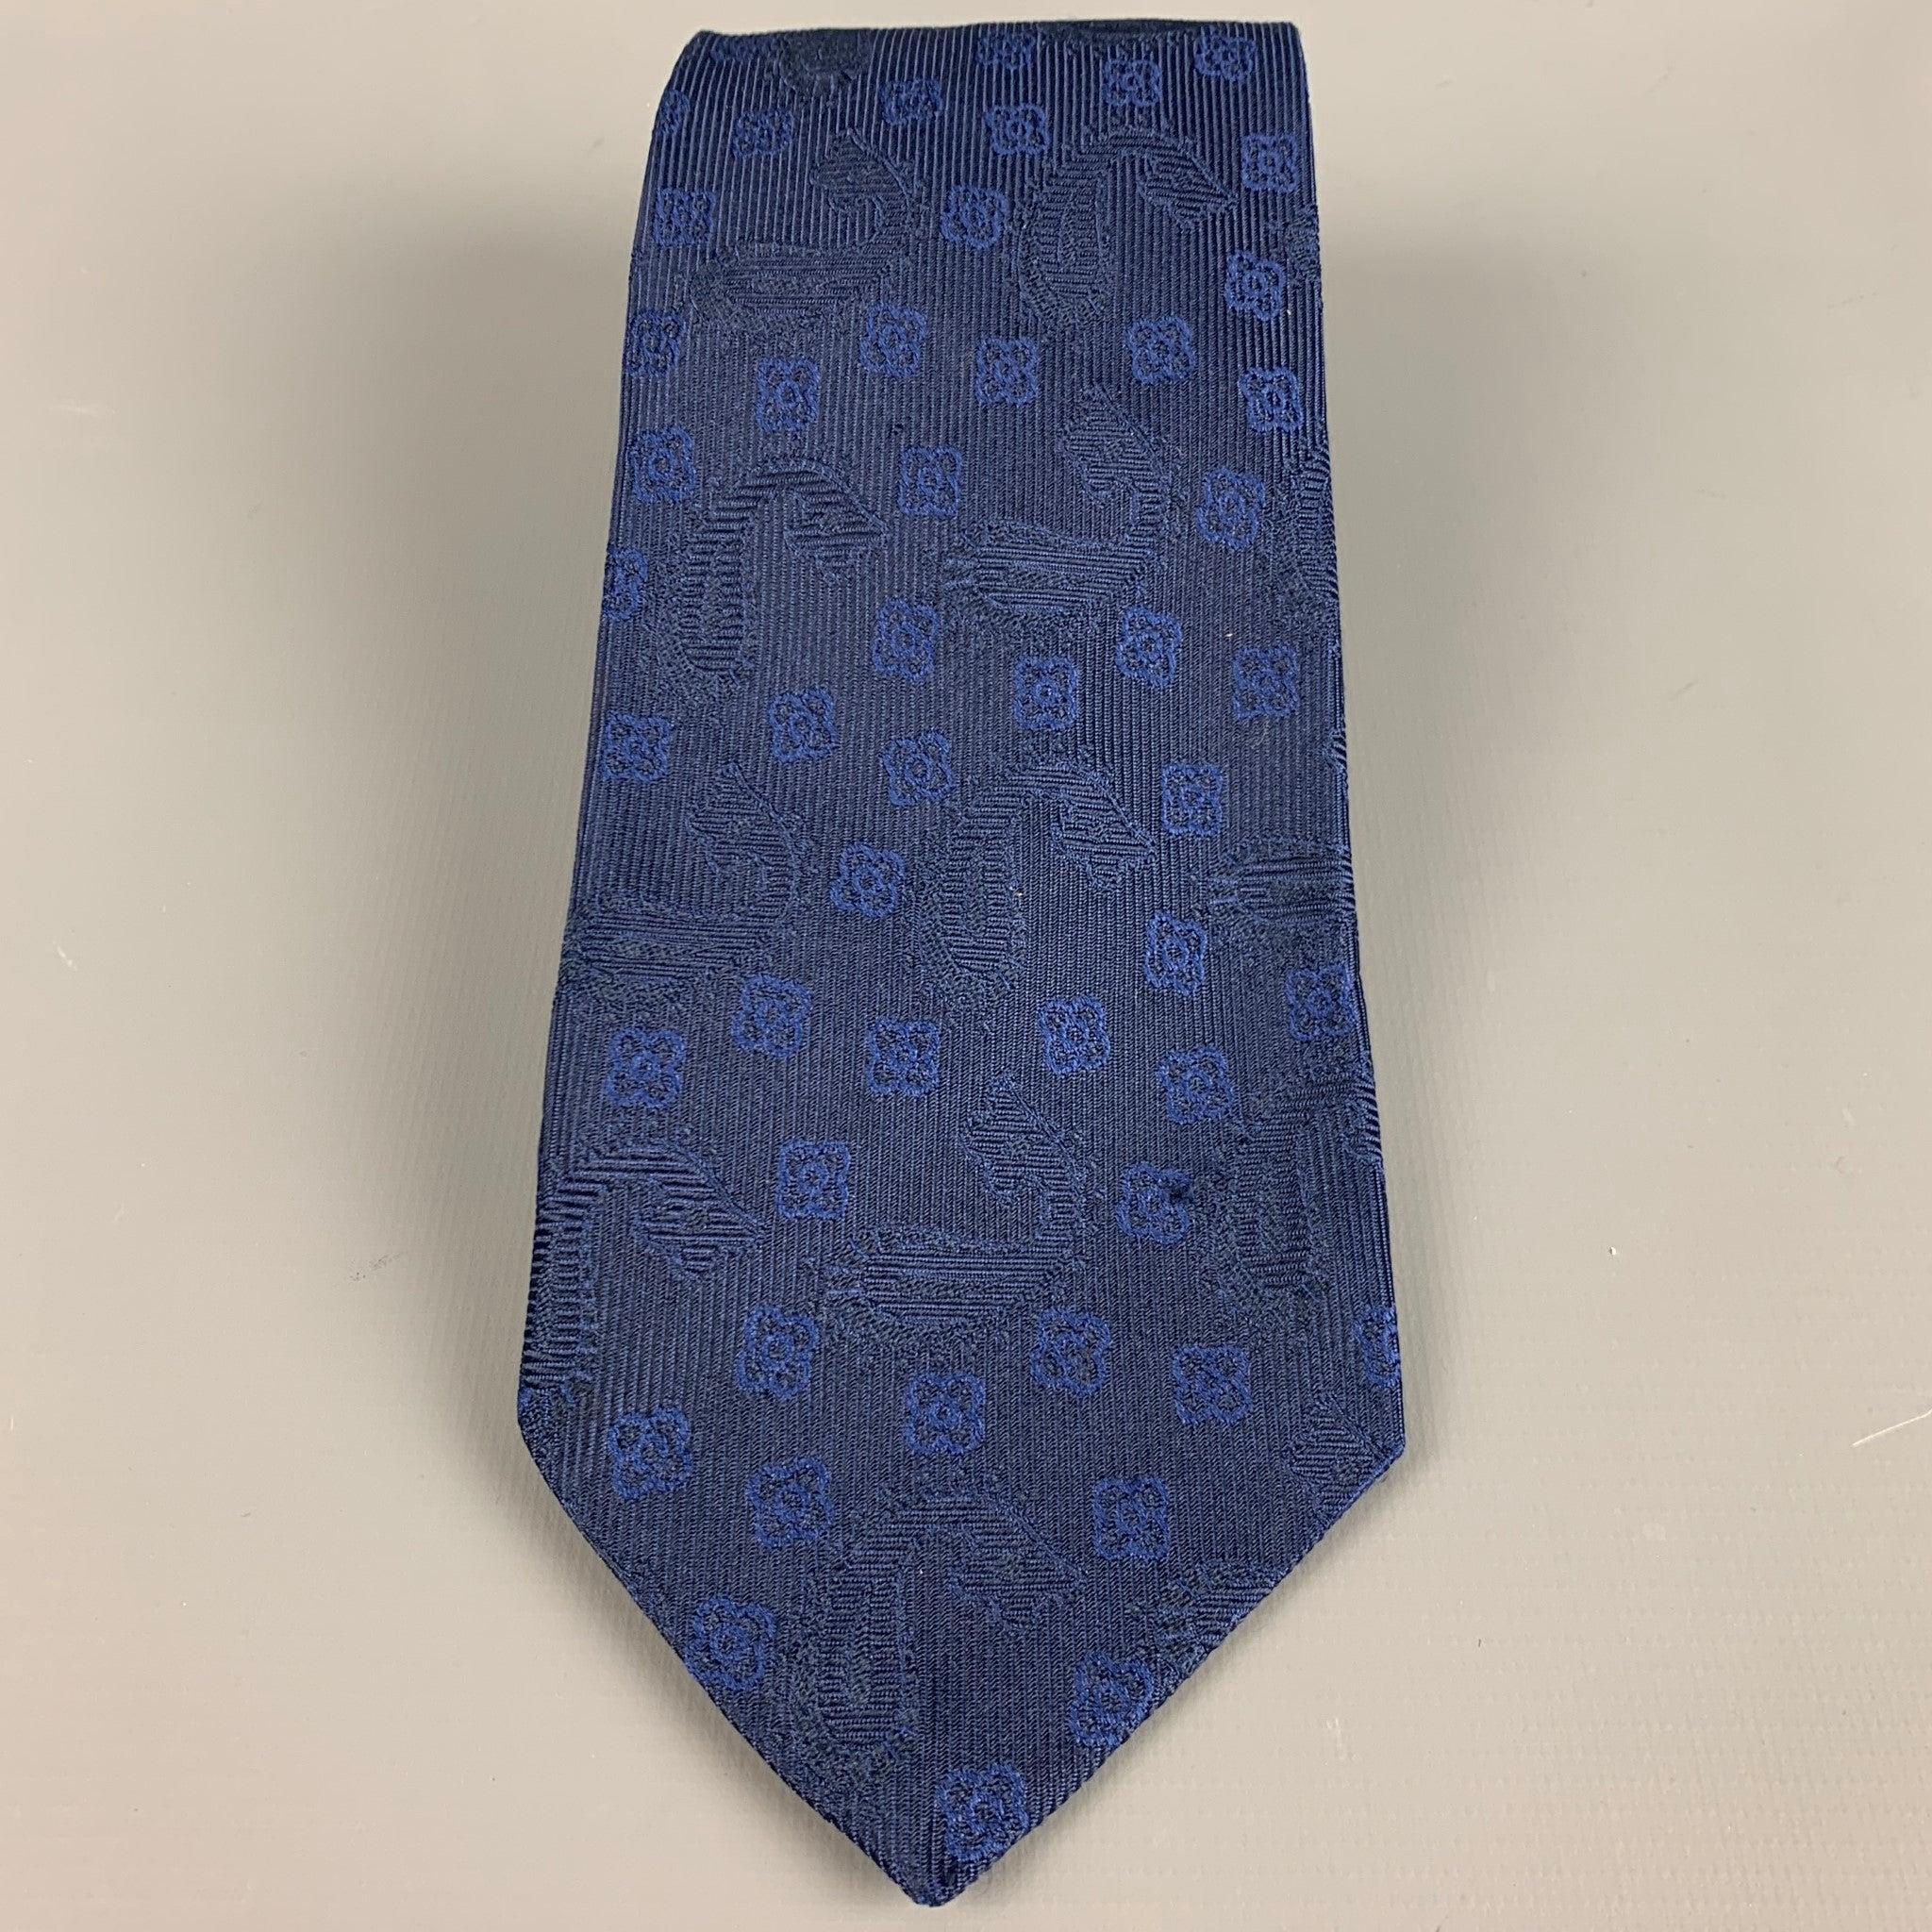 ETRO necktie in a navy silk jacquard featuring abstract floral pattern with paisley details. Made in Italy.
Very Good Pre-Owned Condition. Moderate signs of wear.
 

Measurements: 
  
Width: 3.5 inches Length: 59 inches 
  
  
 
Reference: